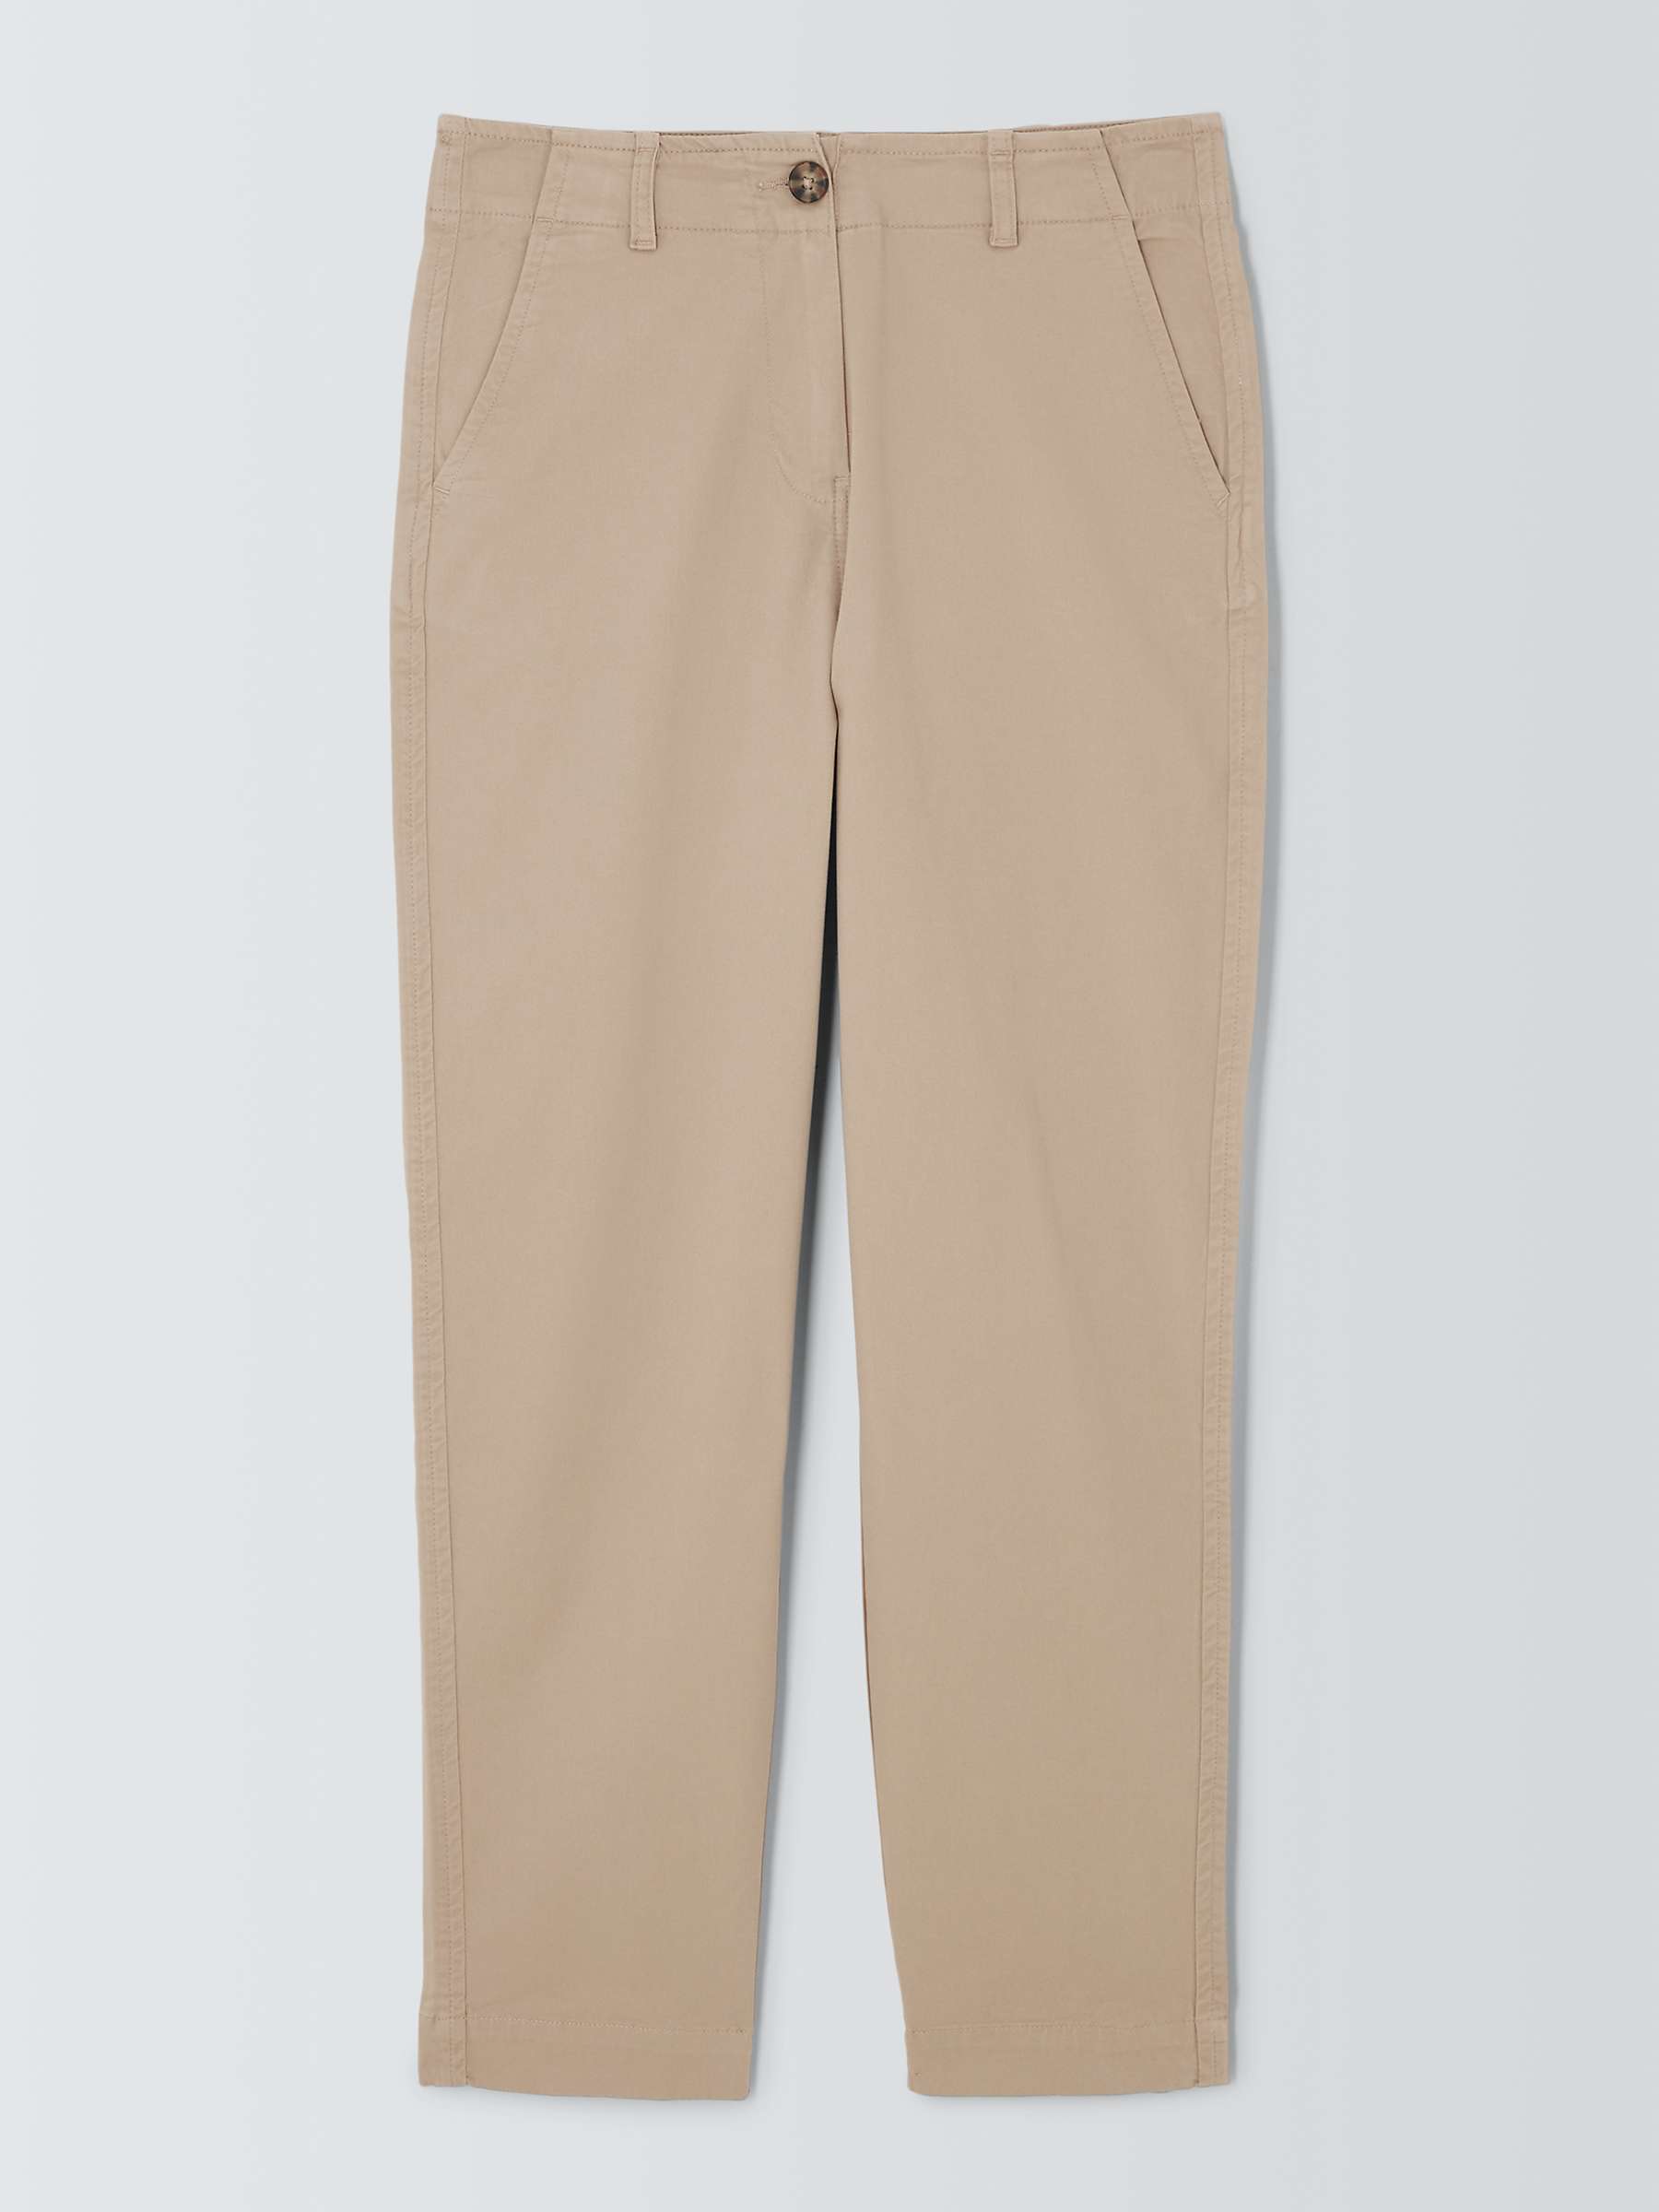 Buy John Lewis Tapered Cotton Blend Chino Trousers Online at johnlewis.com